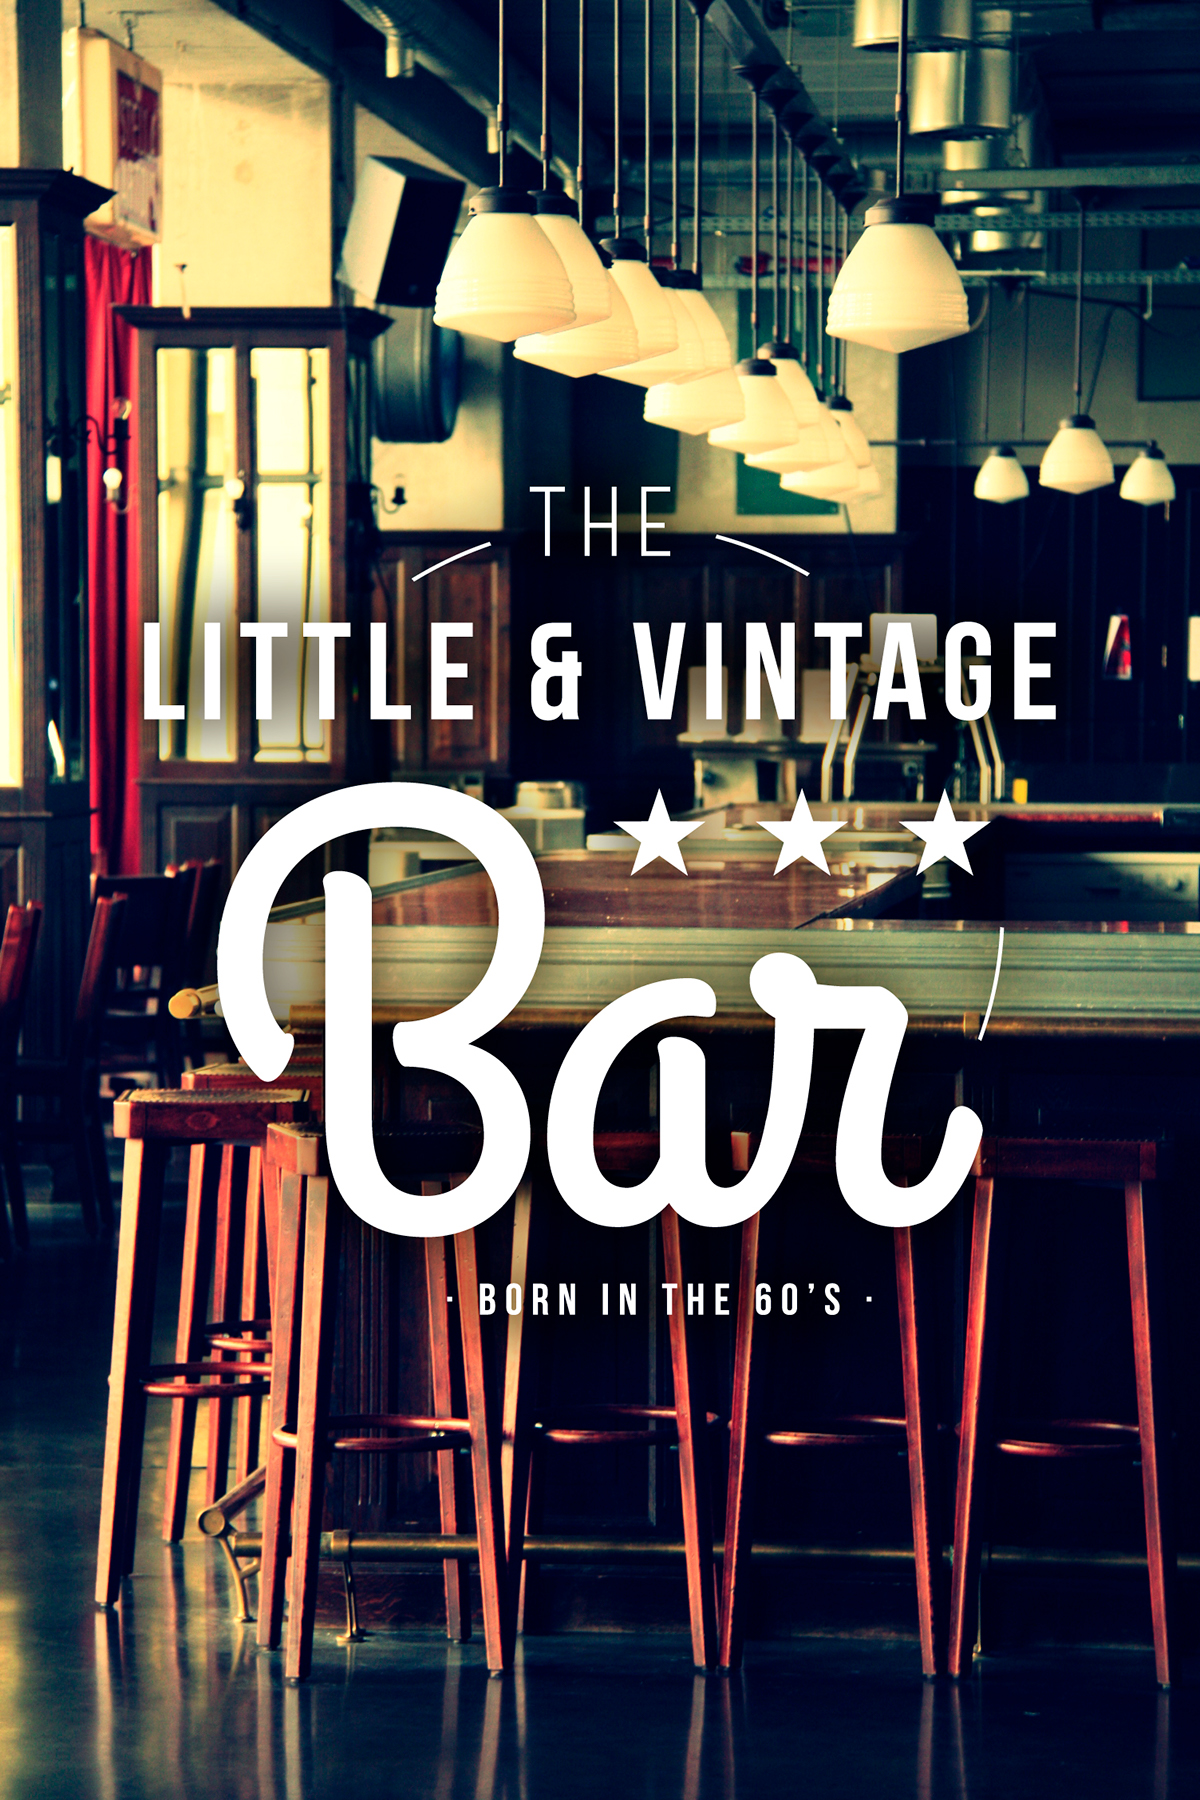 typo poster bar vintage little drink 60's old Classic